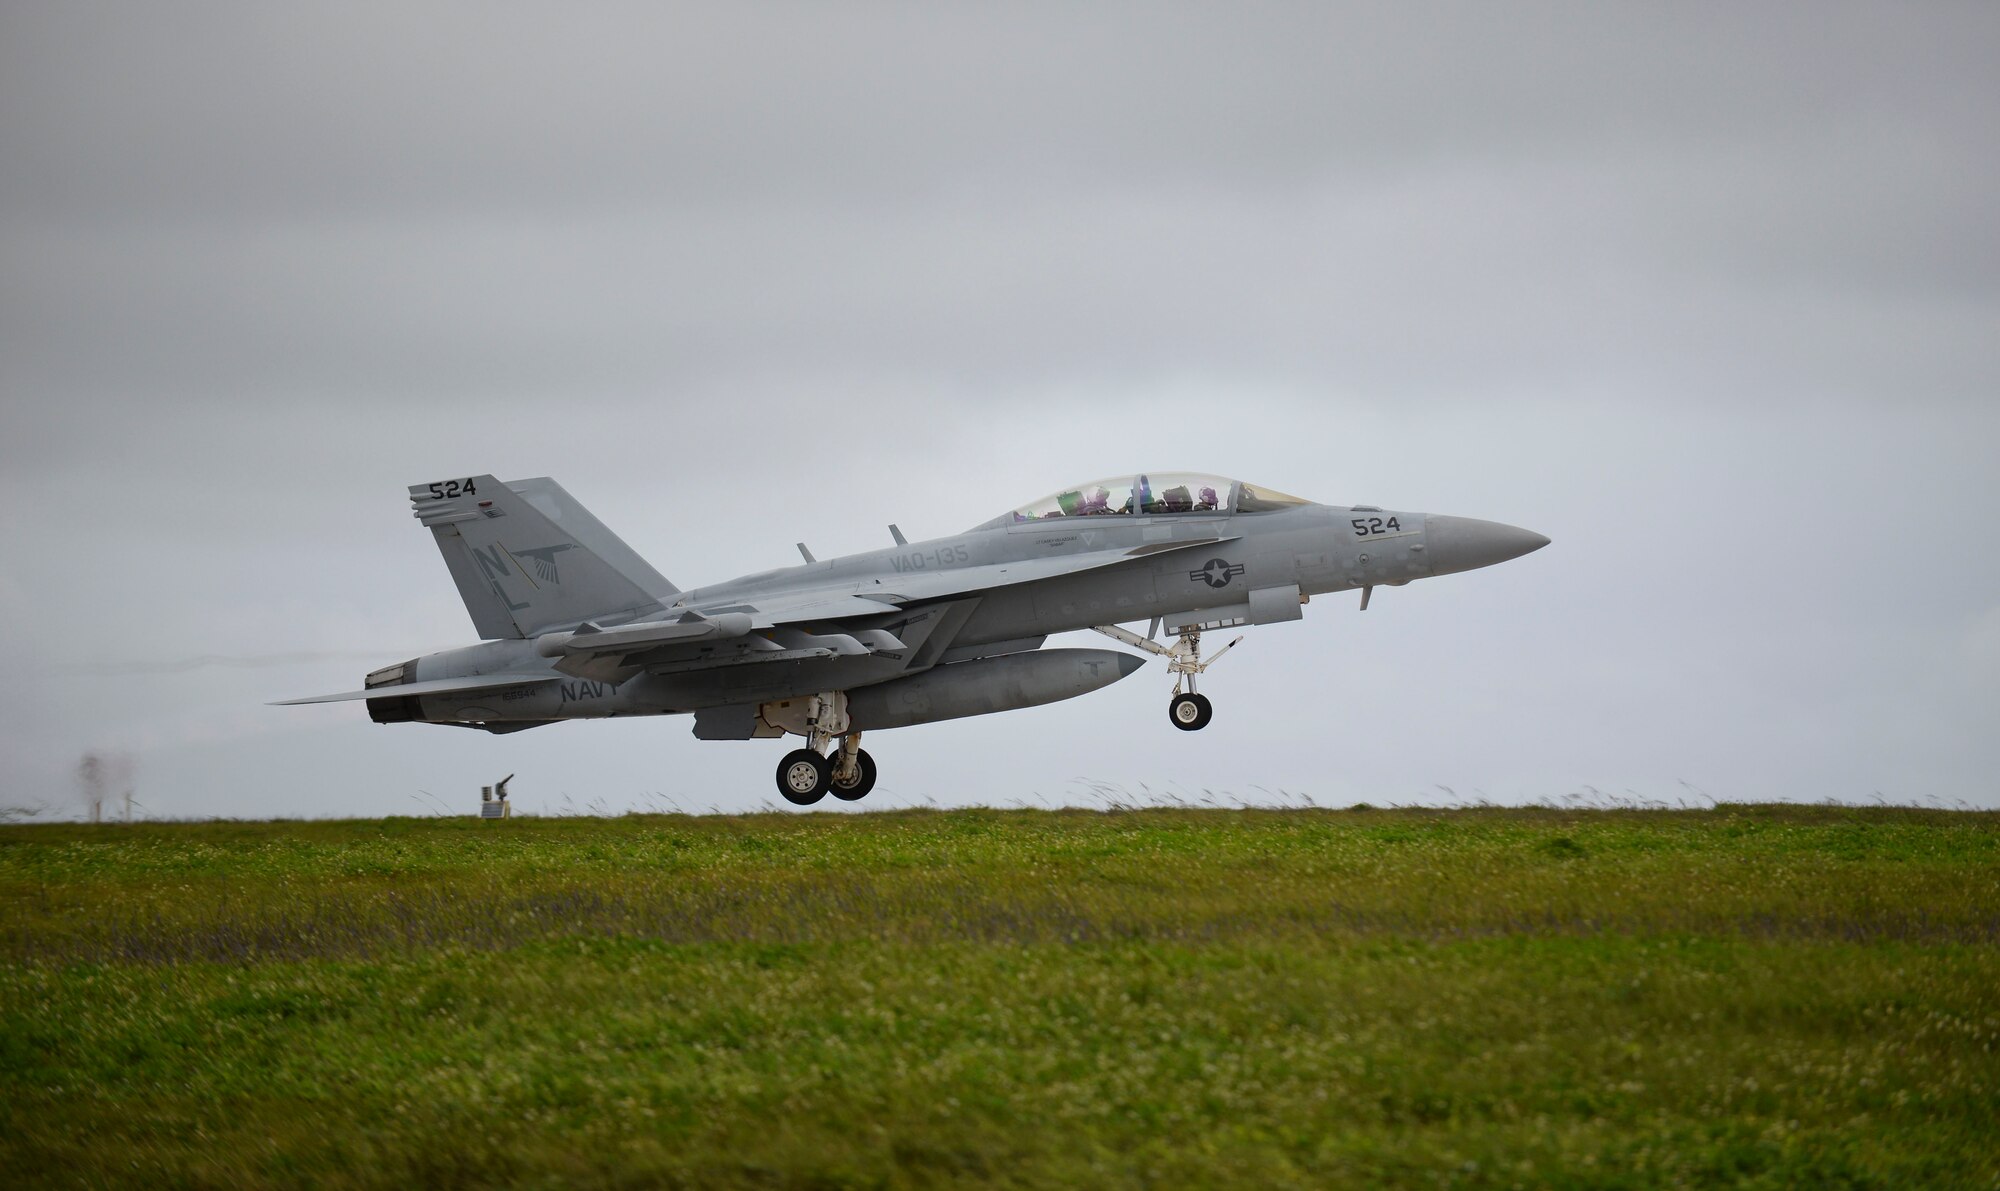 A U.S. Navy EA-18G Growler assigned to Electronic Attack Squadron 135, Misawa Air Base, Japan, takes off during Exercise Cope North 2017 at Andersen Air Force Base, Guam, Feb. 16, 2017. Cope North is a long-standing Pacific Air Forces-led exercise designed to enhance multilateral air operations between the U.S. Air Force, U.S. Navy, Japan Air Self-Defense Force and Royal Australian Air Force. (U.S. Air Force photo by Airman 1st Class Christopher Quail/Released)